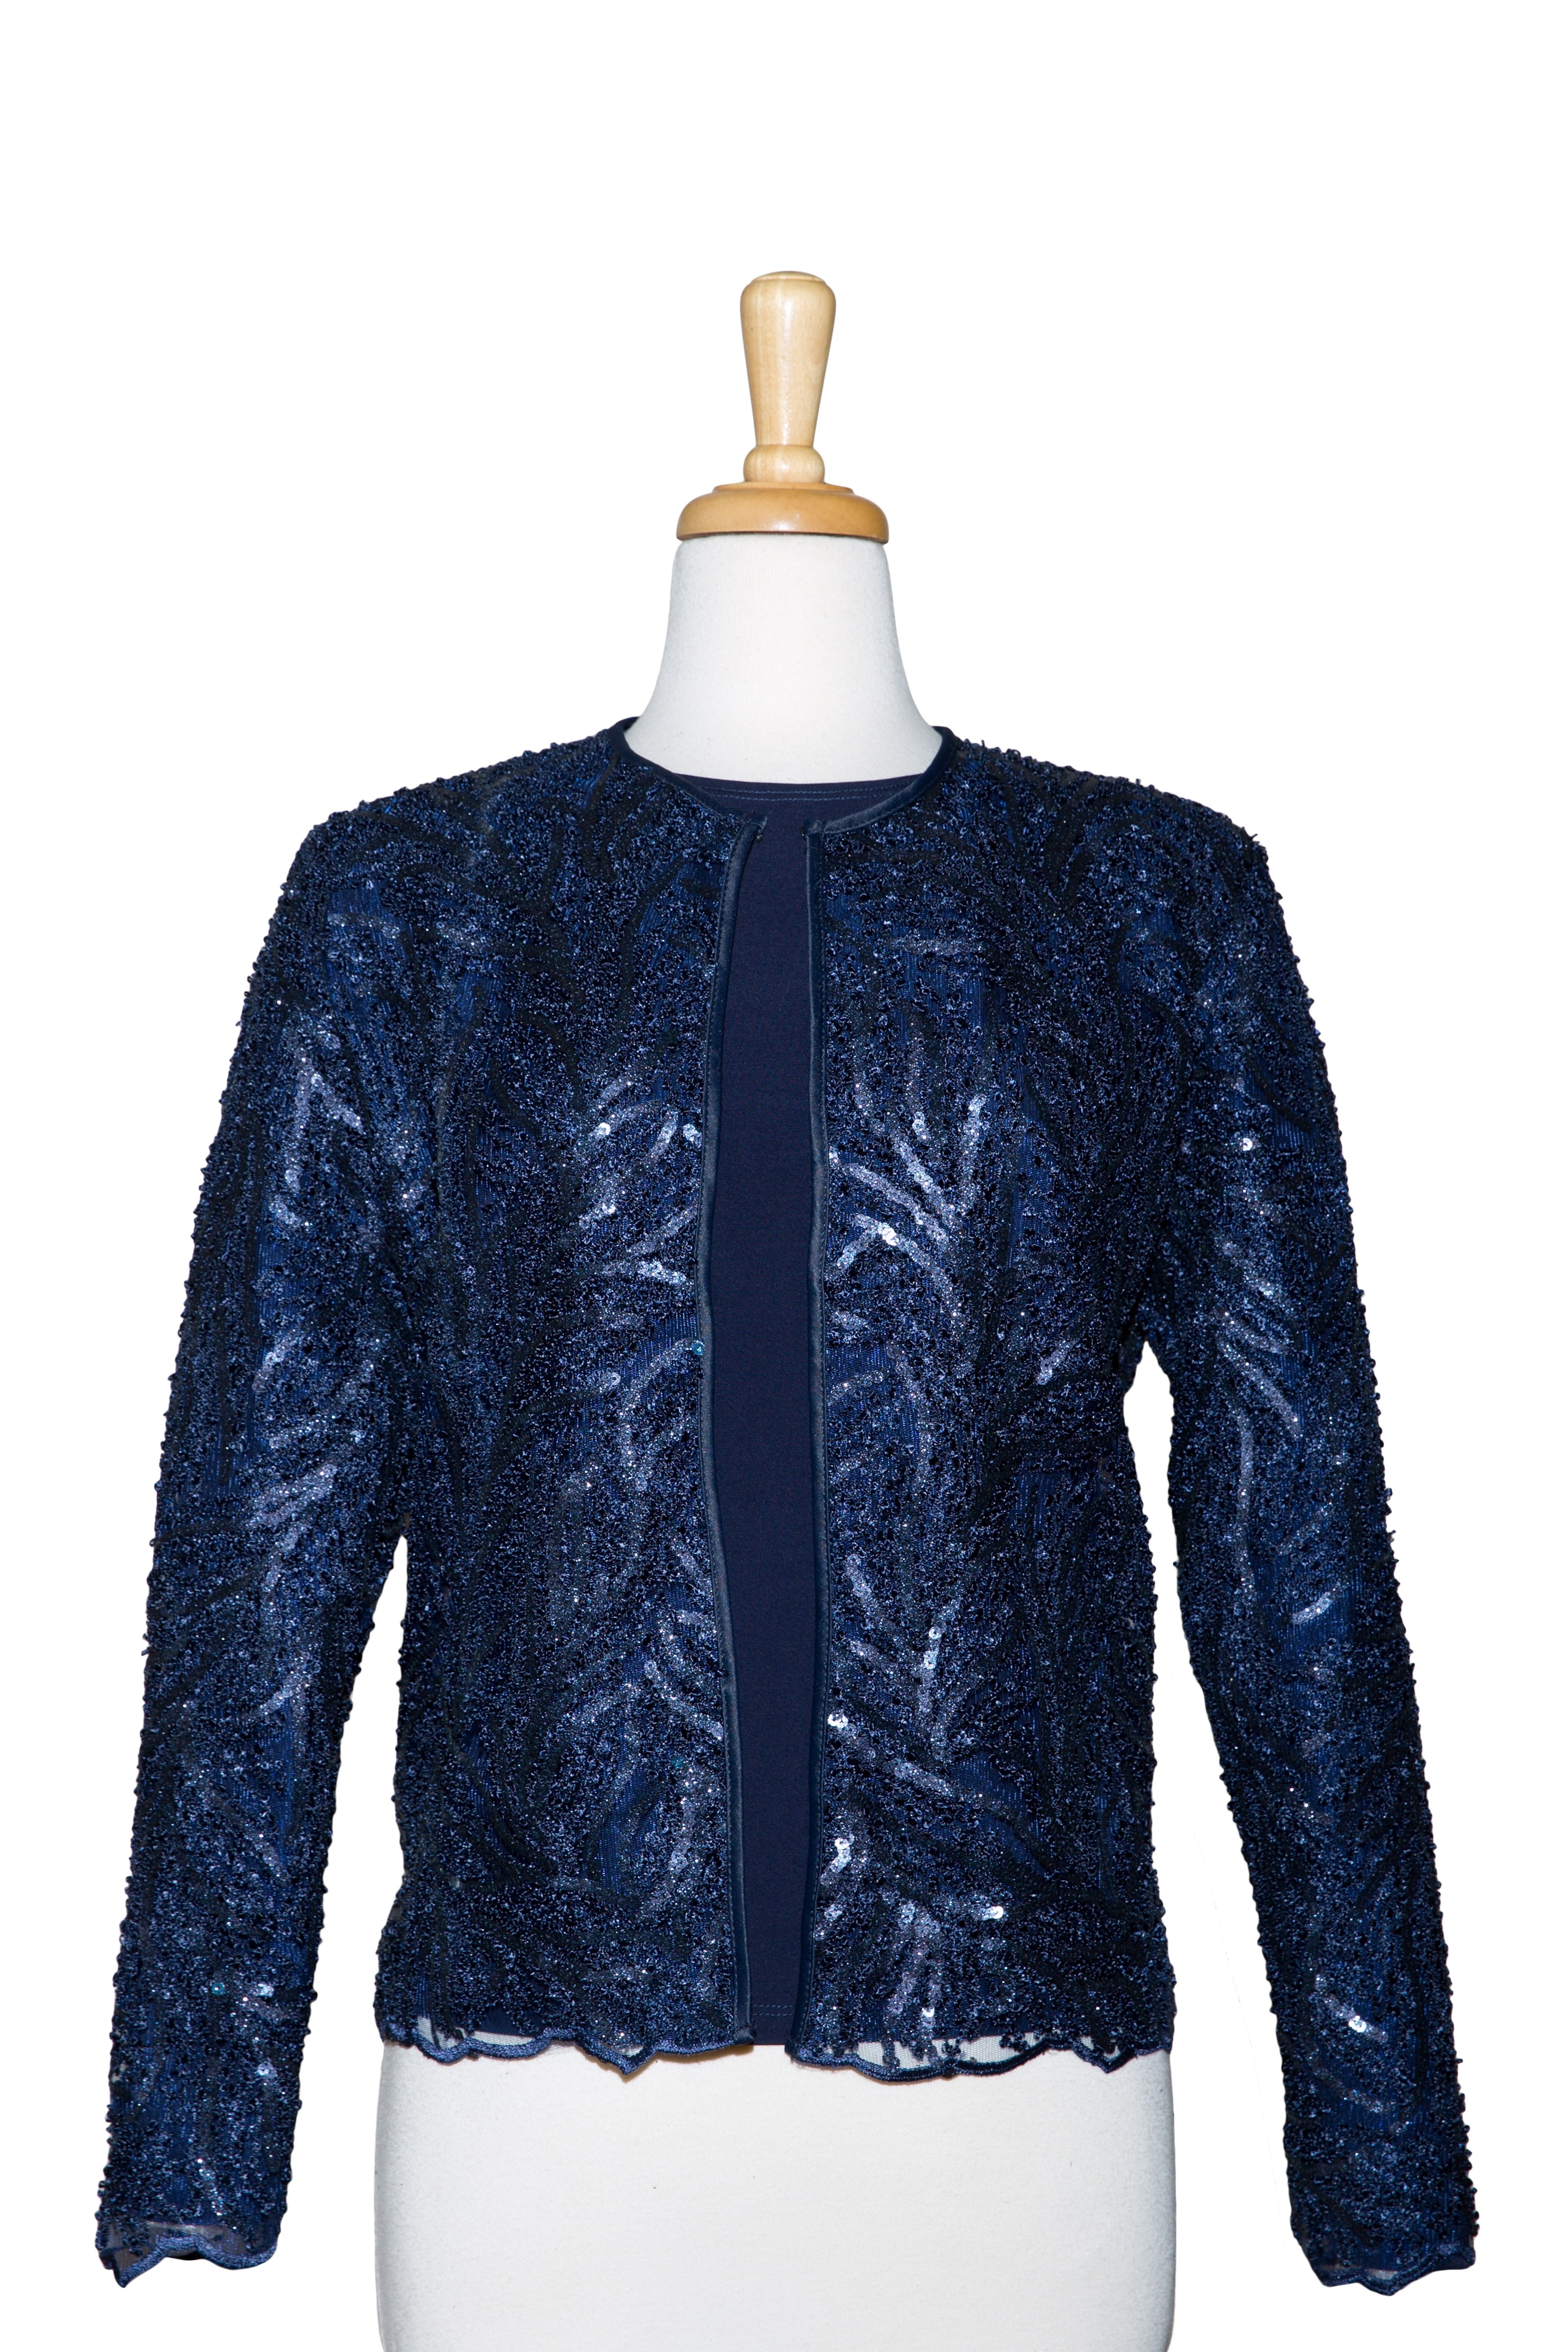 Plus Size Two Piece Navy Boucle Sequins Lace Jacket With Navy Long Sleeve Top